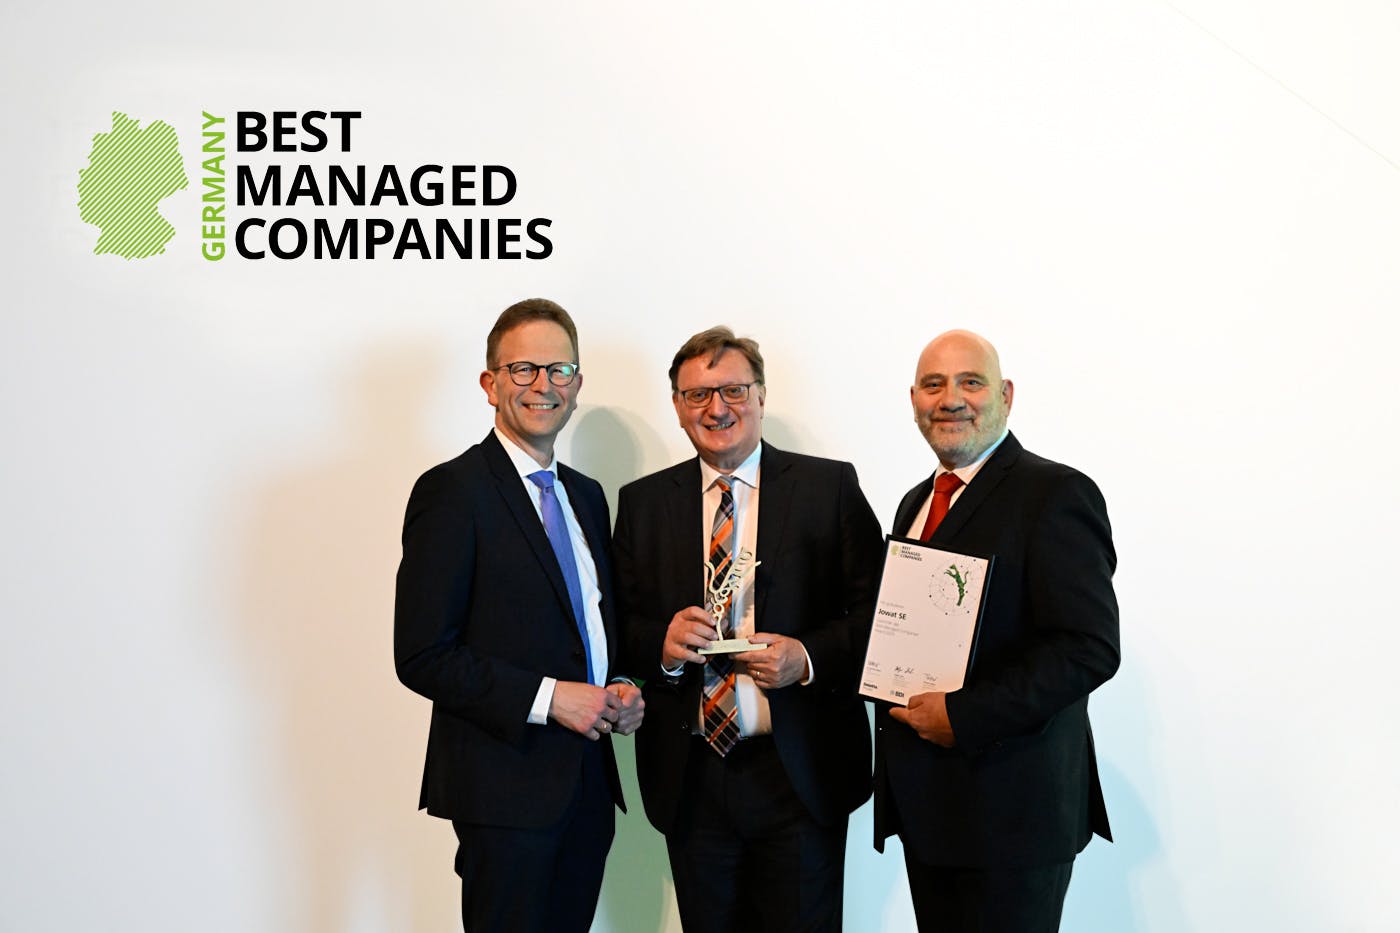 The Board of Directors of Jowat SE is delighted with the Gold Standard as Best Managed Company. Left to right: Dr. Christian Terfloth, Ralf Nitschke, Klaus Kullmann.